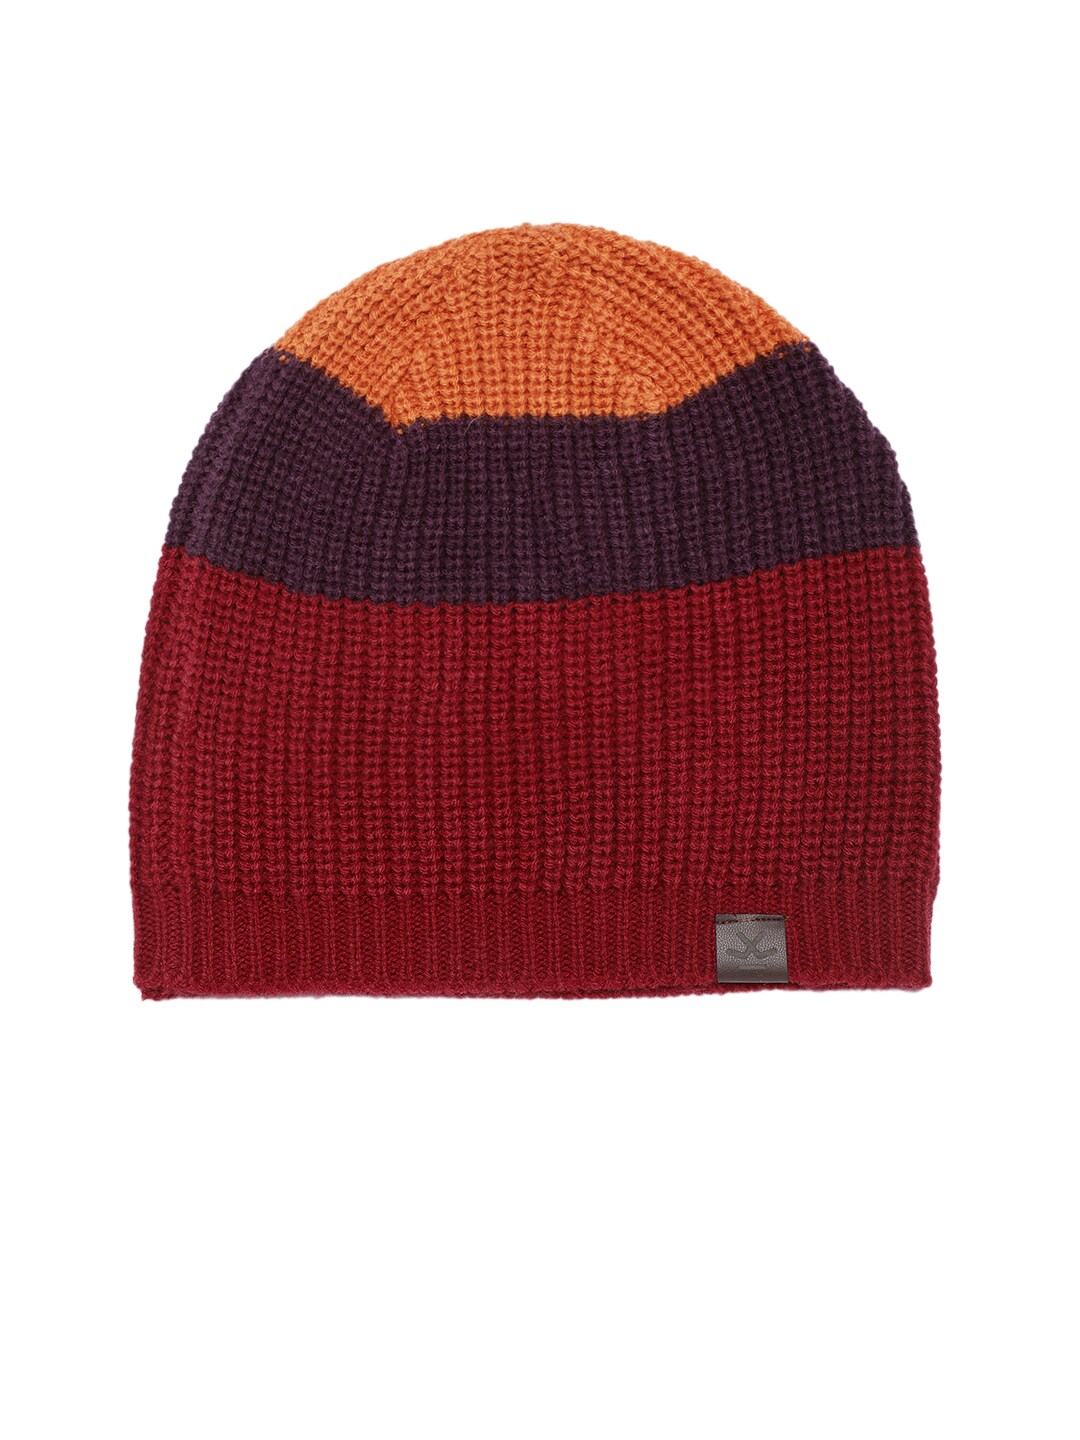 WROGN Unisex Red & Brown Colourblocked Beanie Price in India